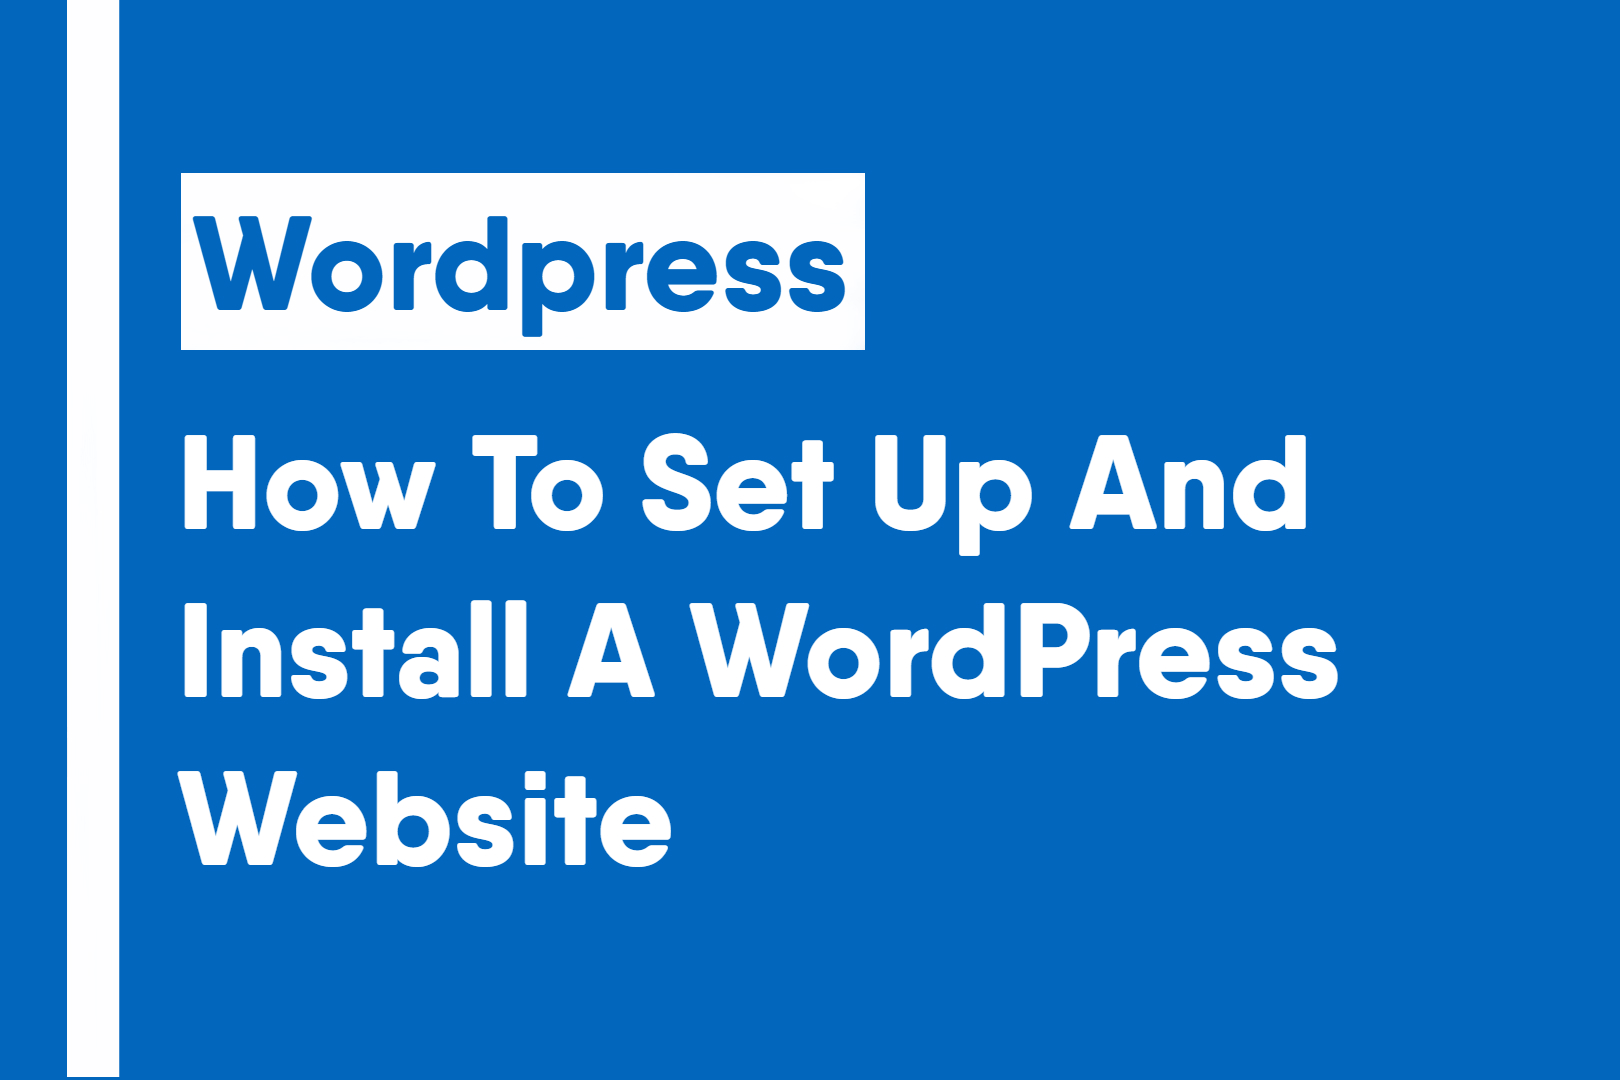 How to set up and install a wordpress website